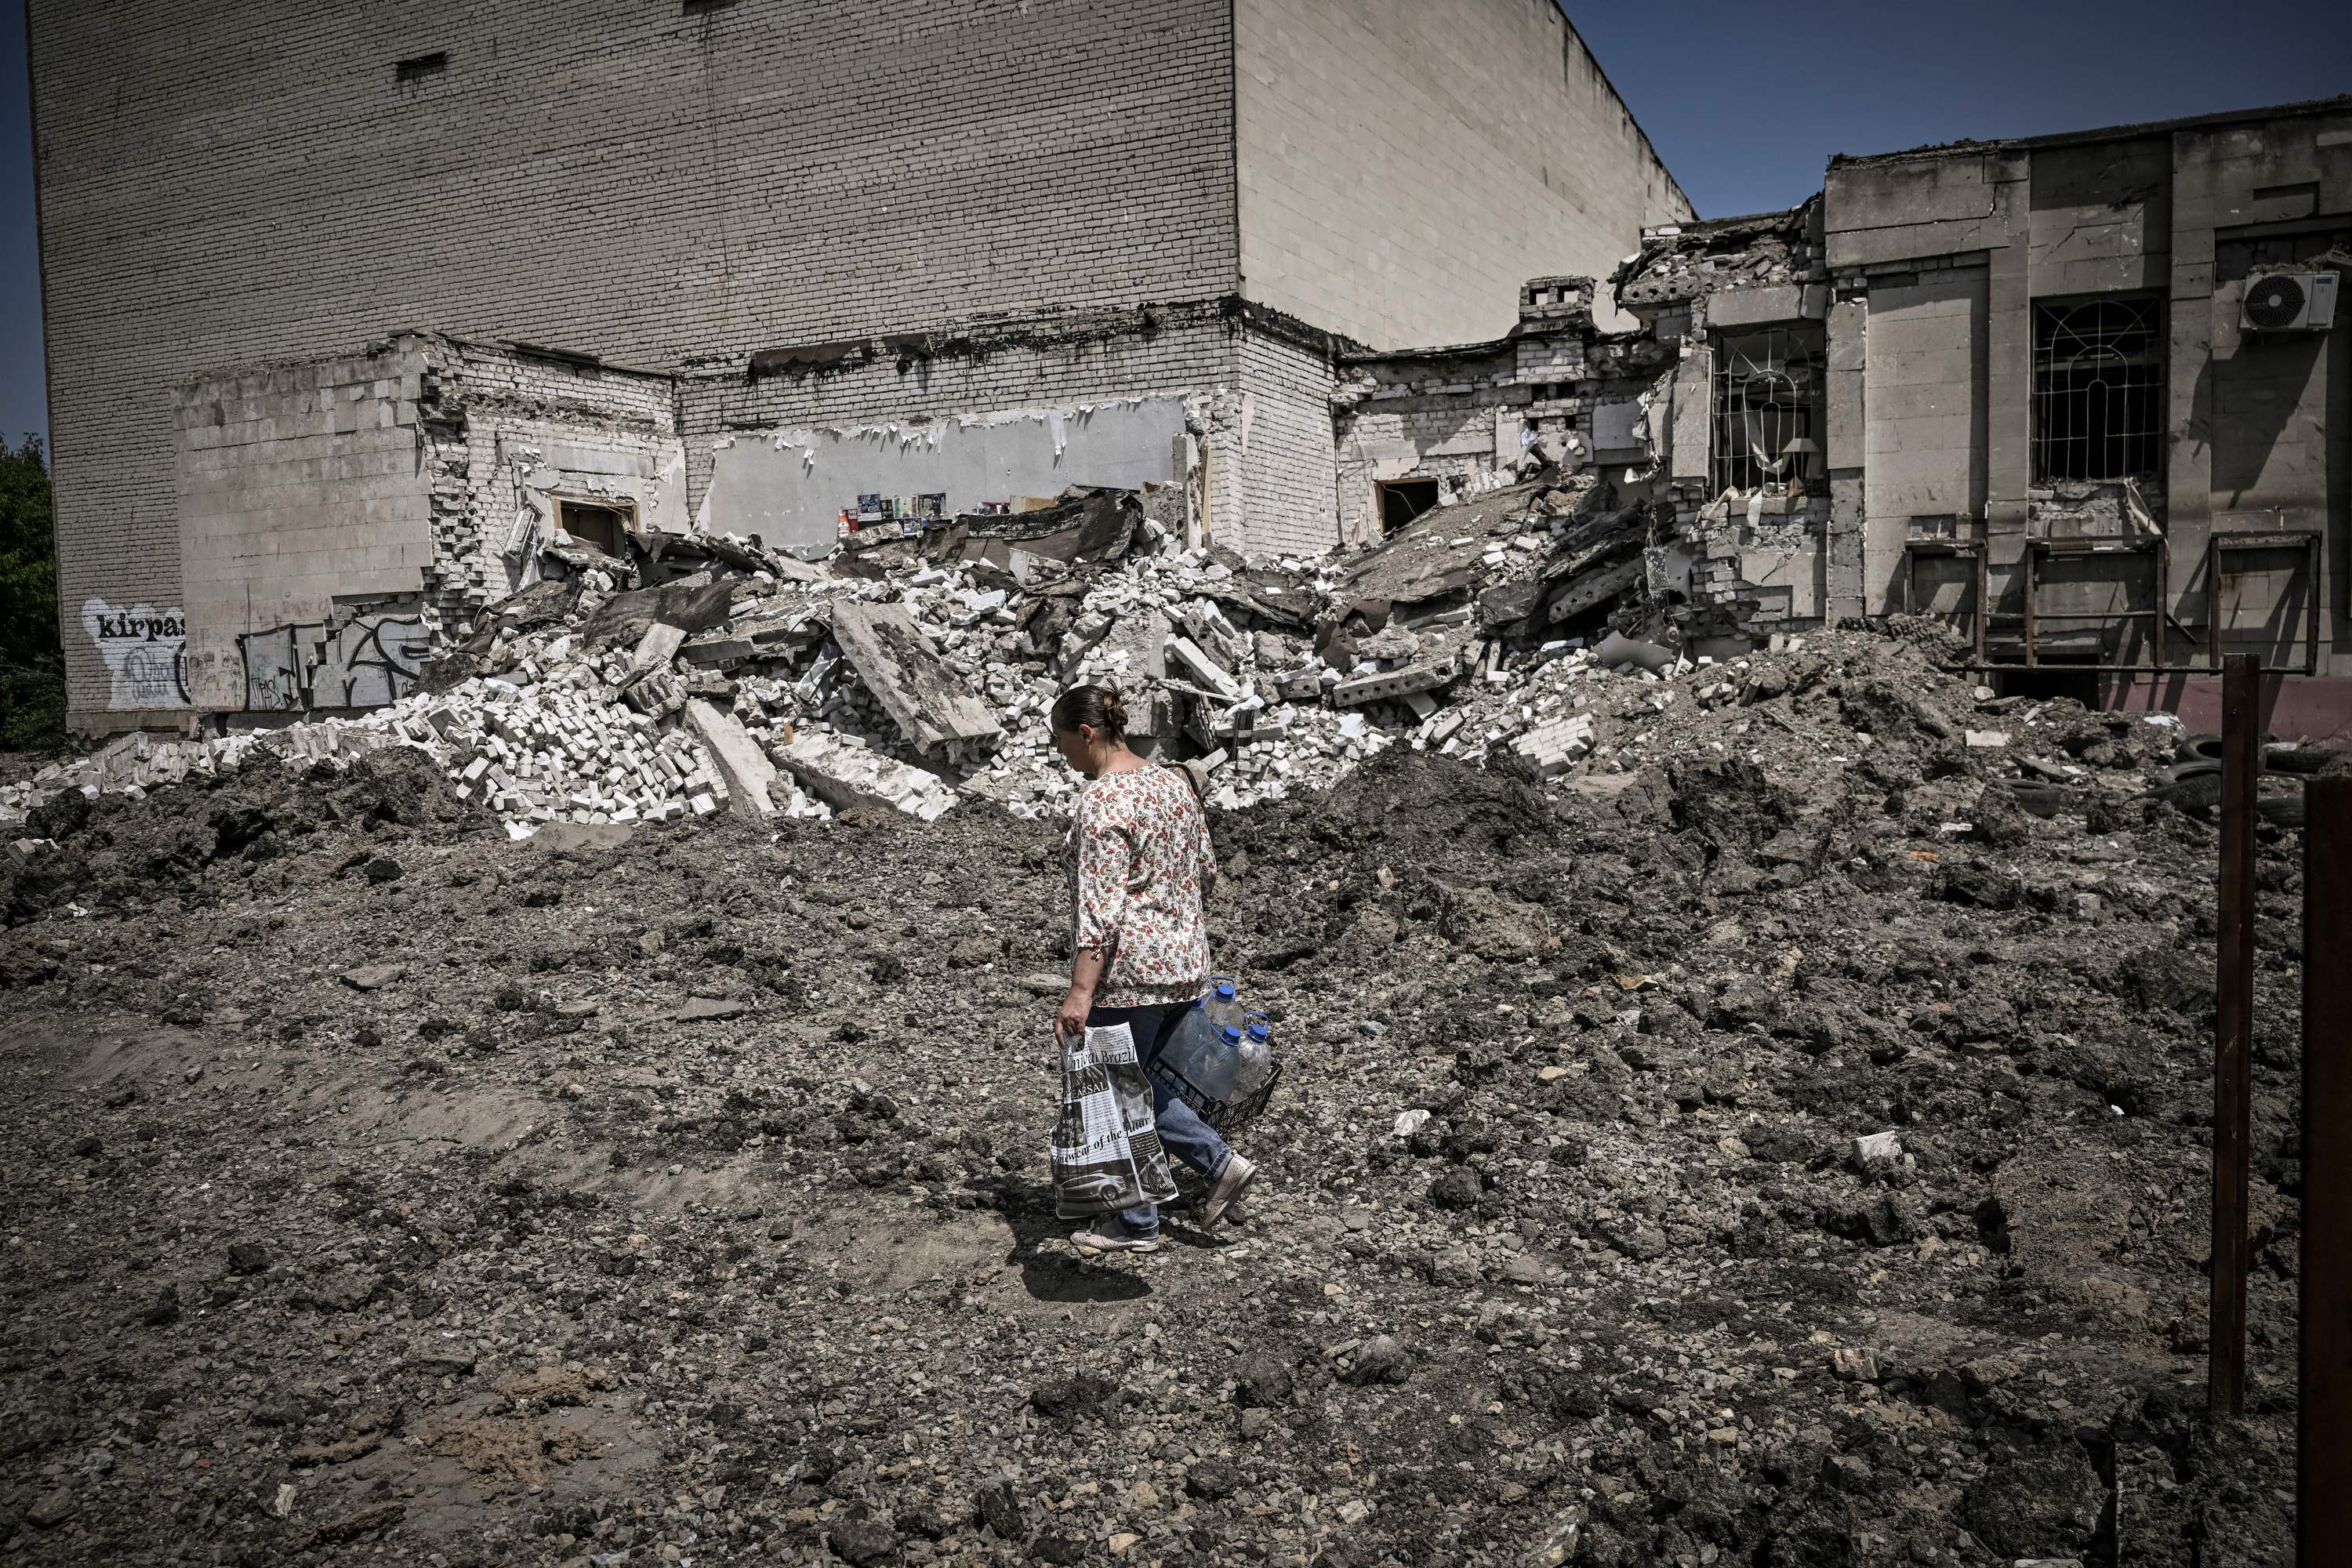 A woman walks past a bombed building in Lysytsansk.